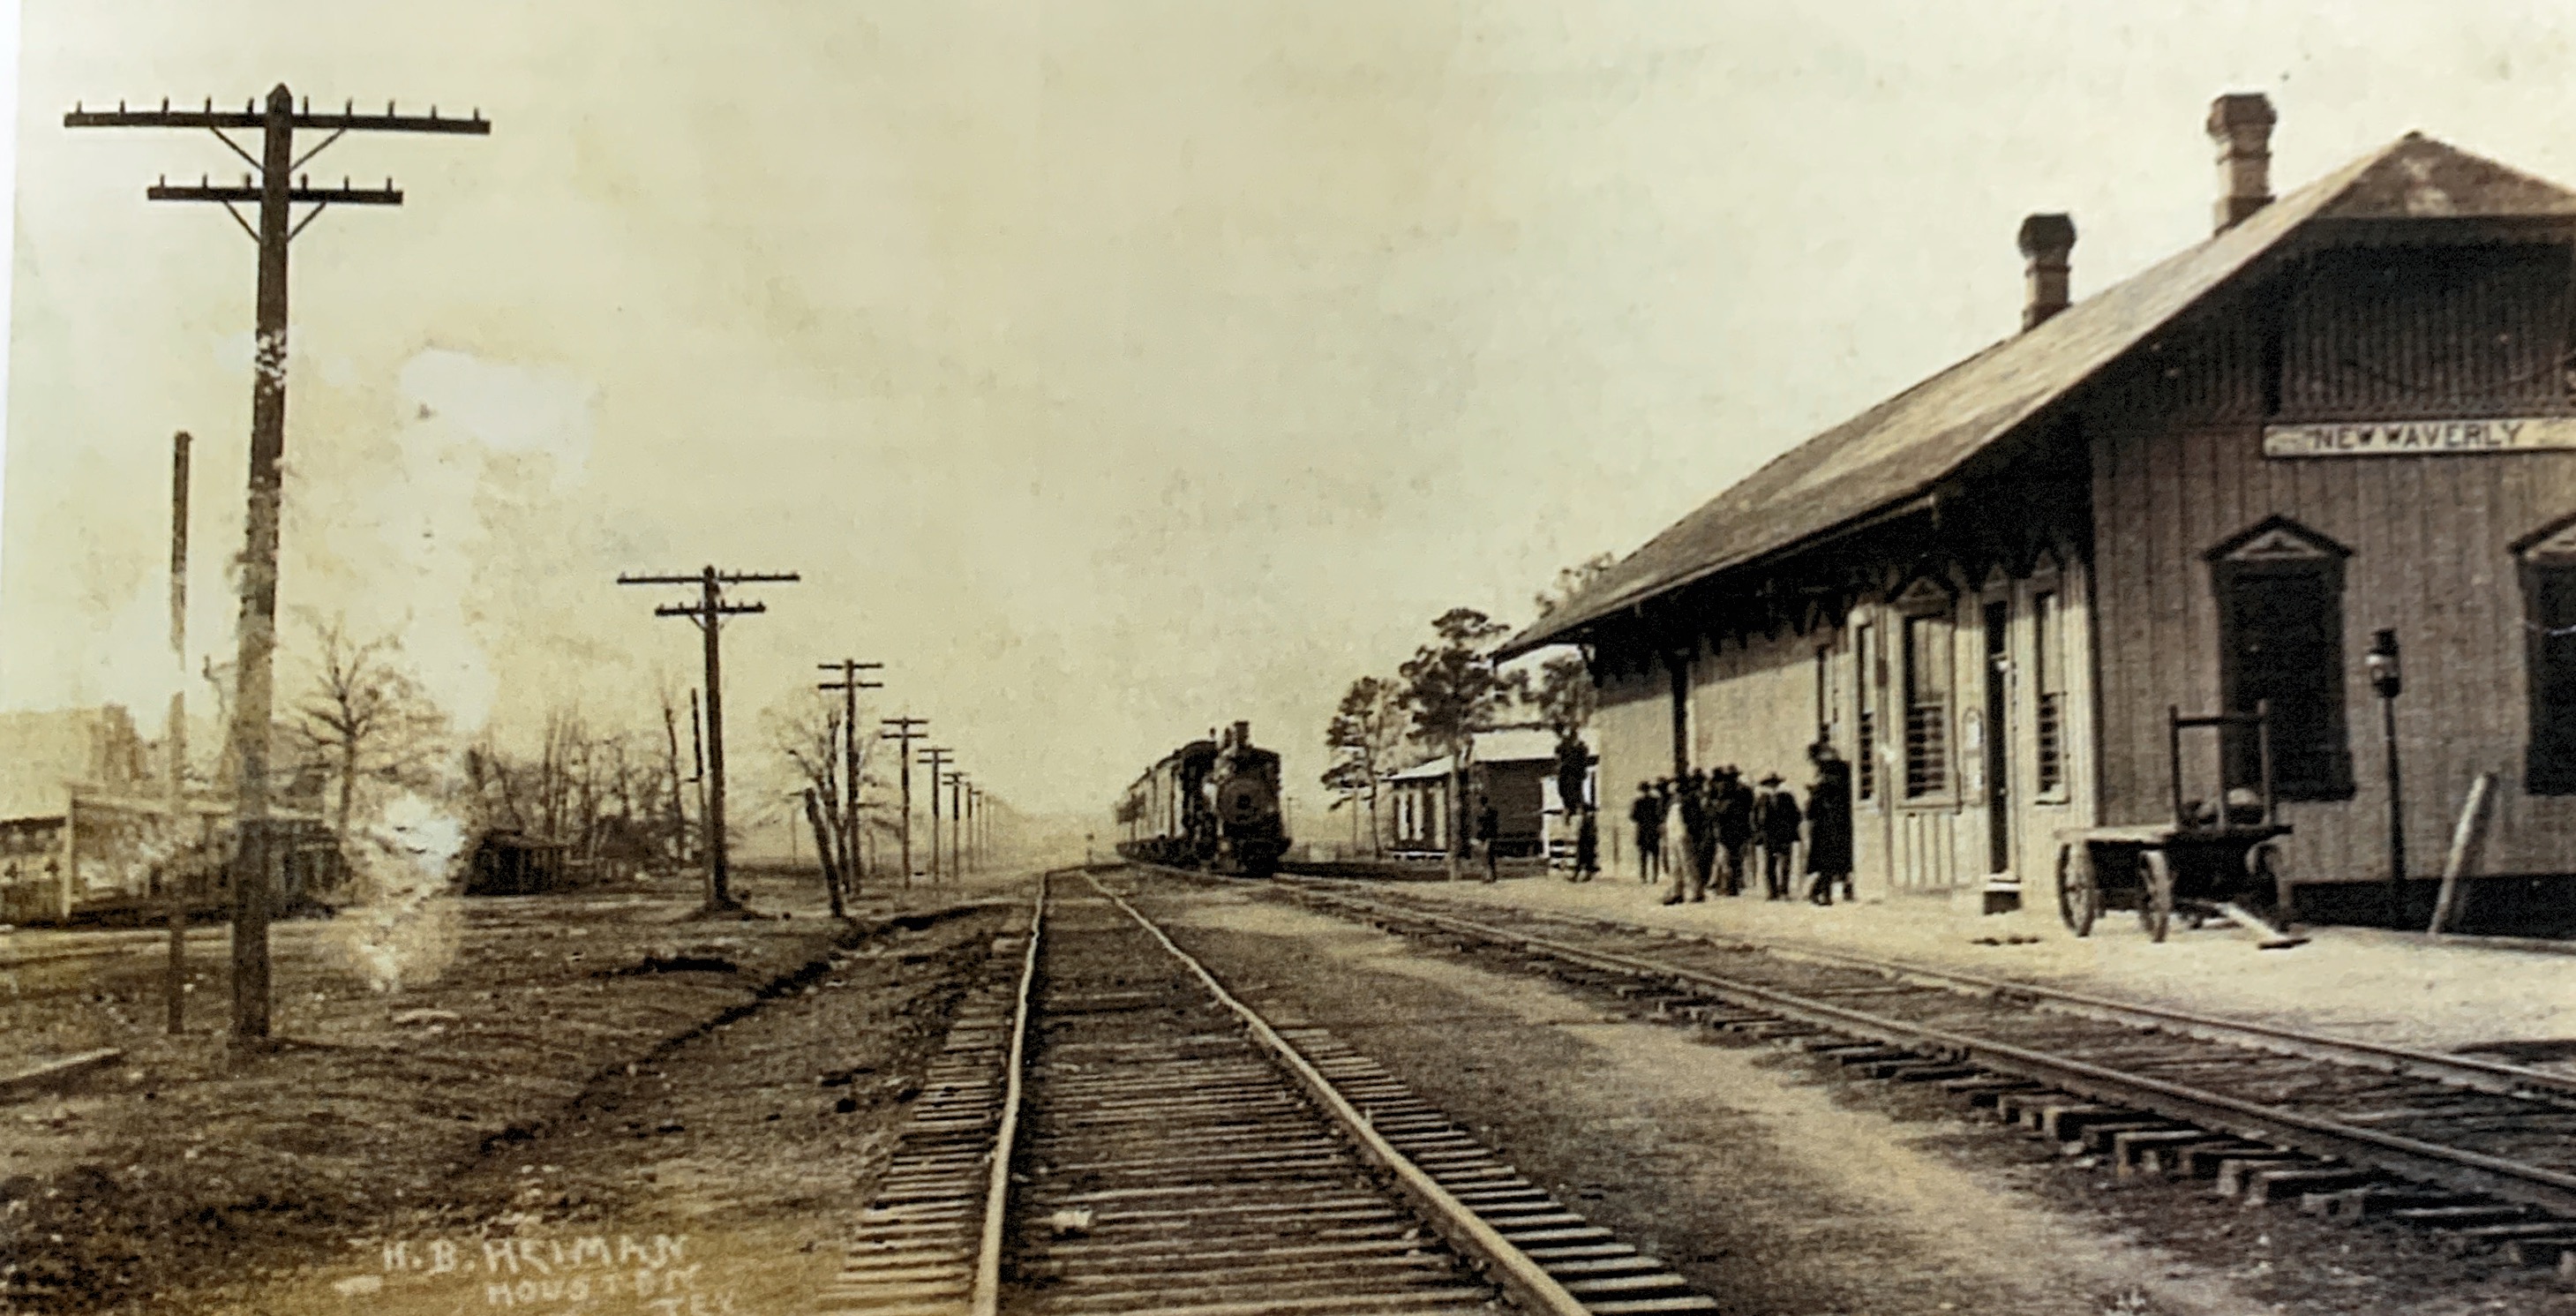 New Waverly Train Depot in early 1900s